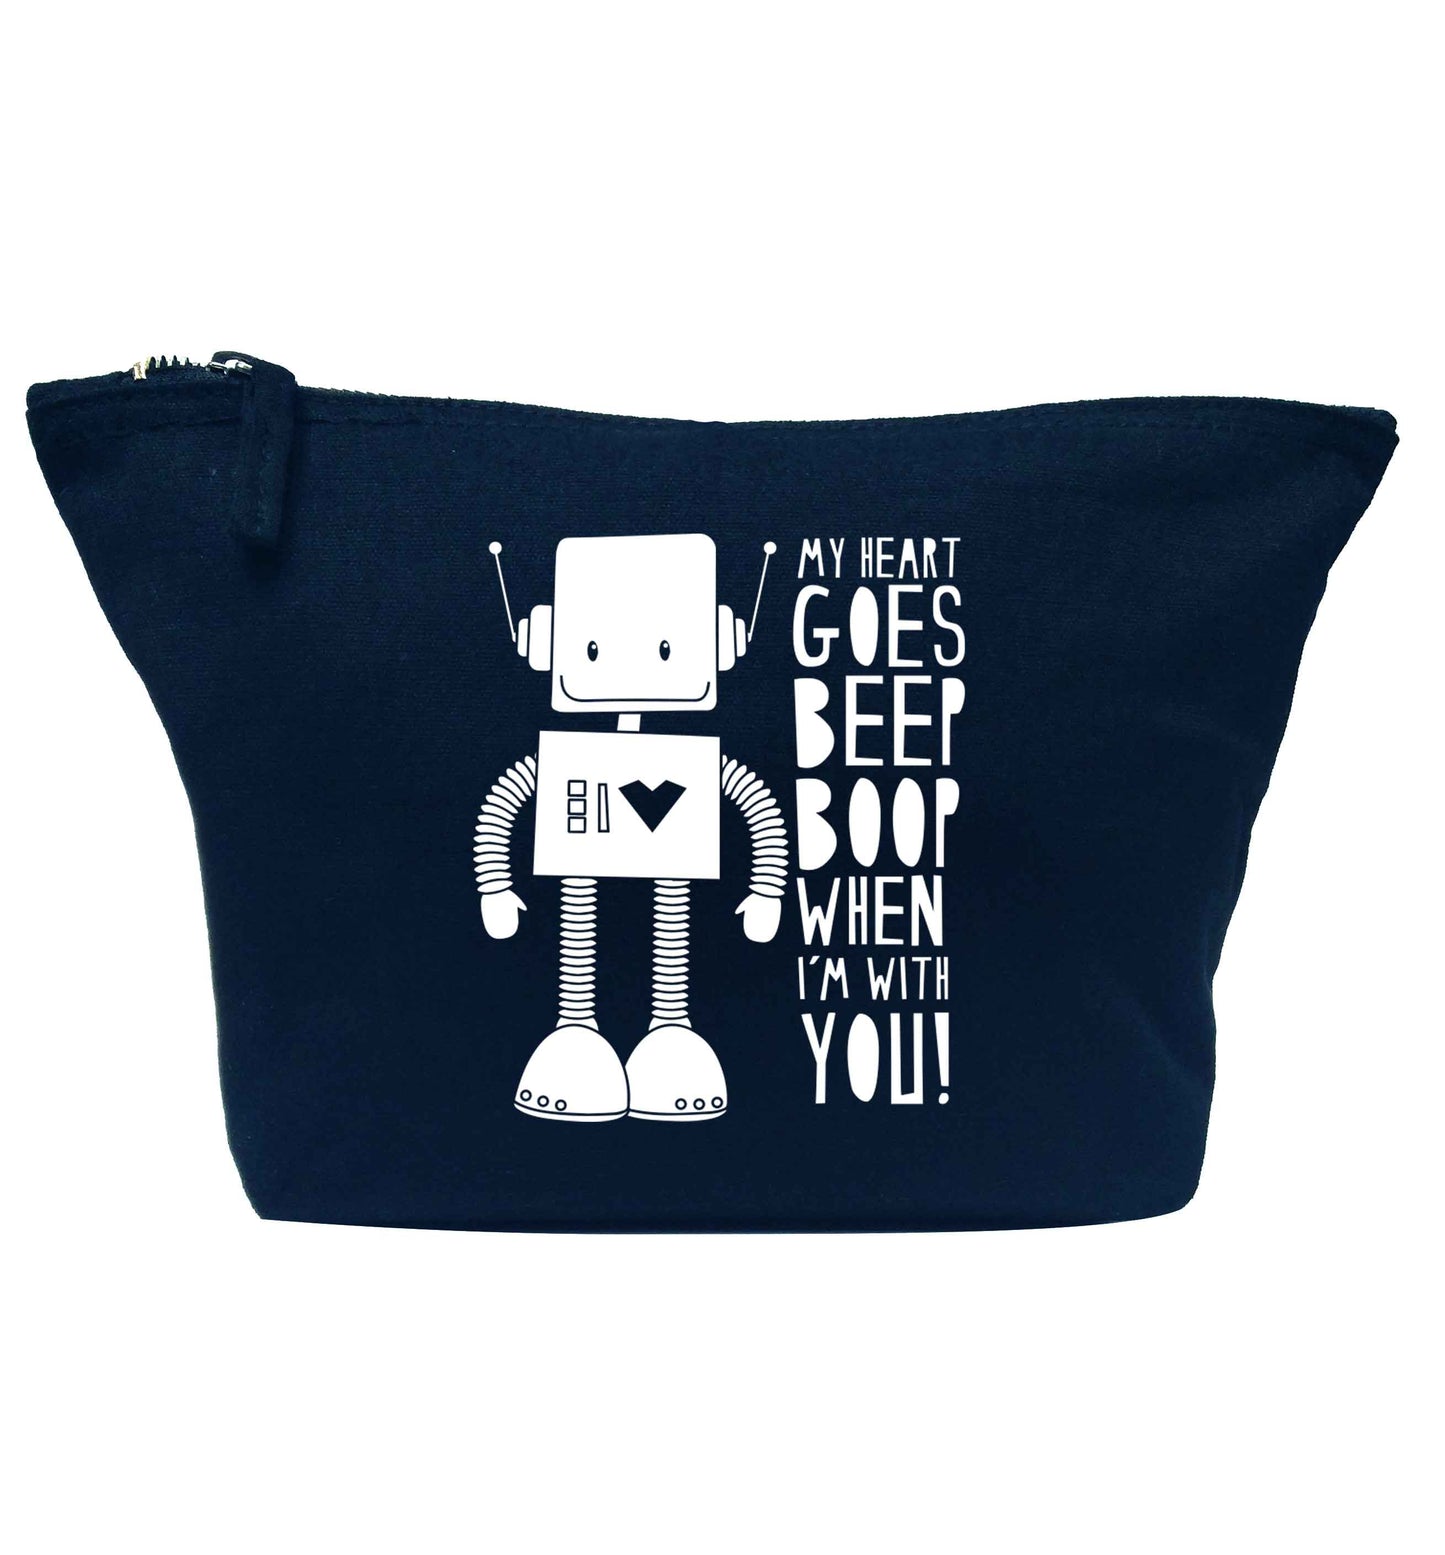 My heart goes beep boop when I'm with you navy makeup bag